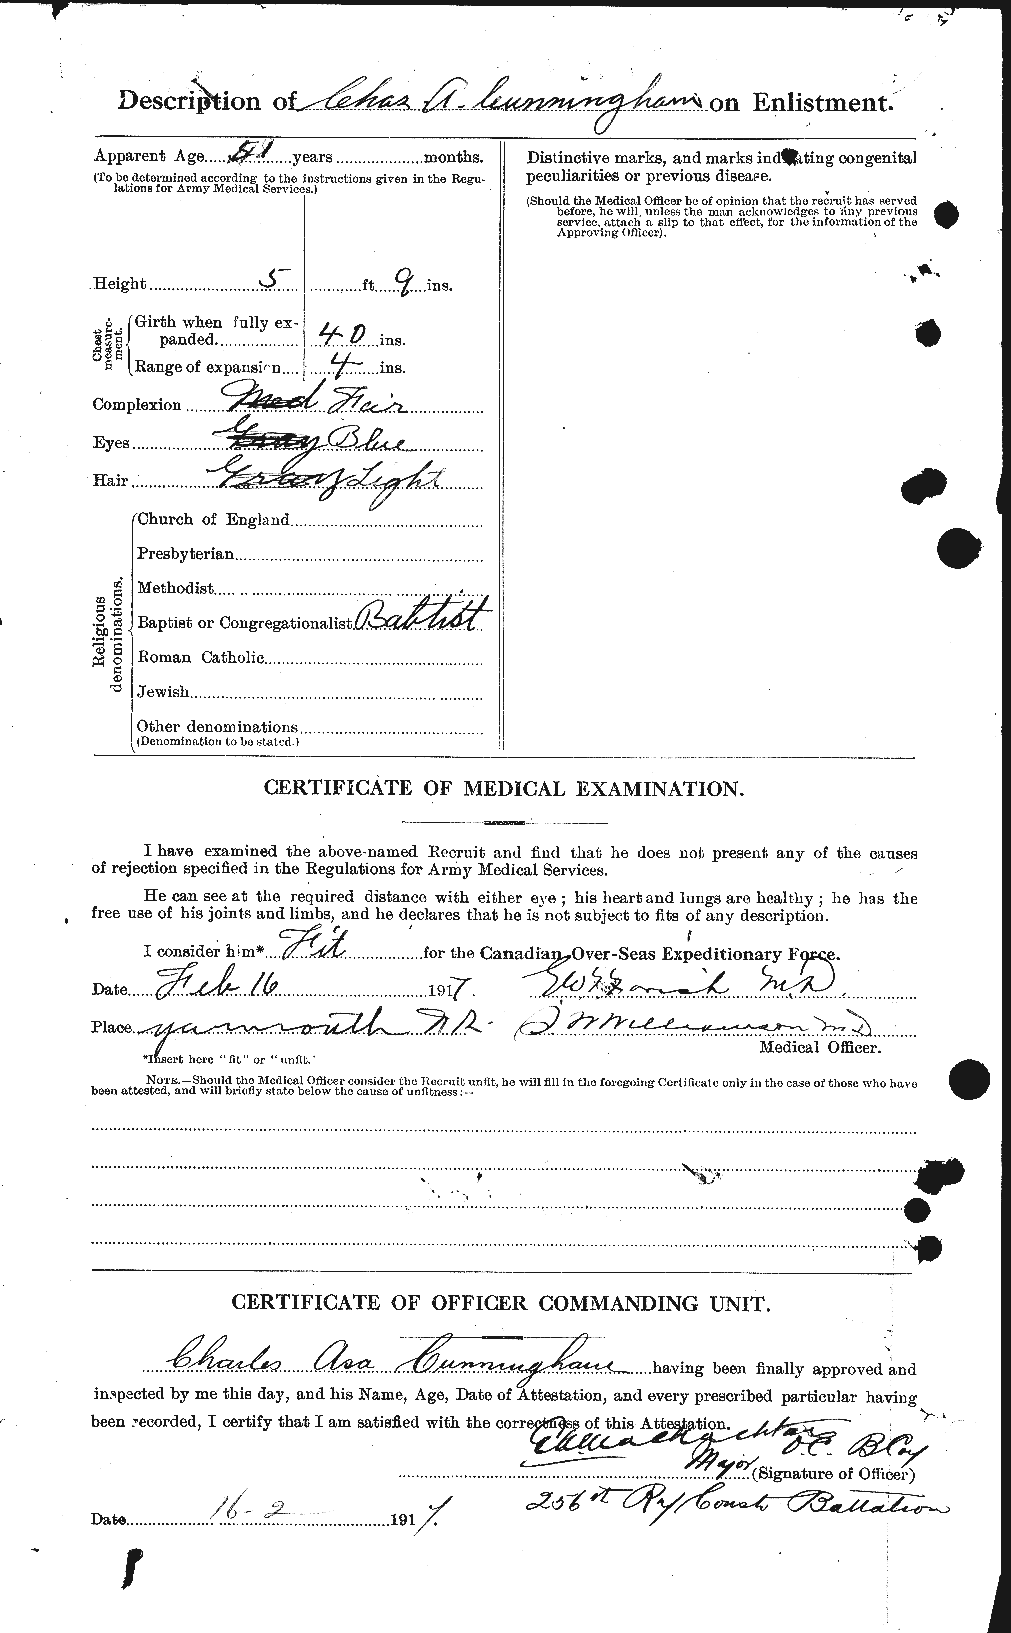 Personnel Records of the First World War - CEF 078328b